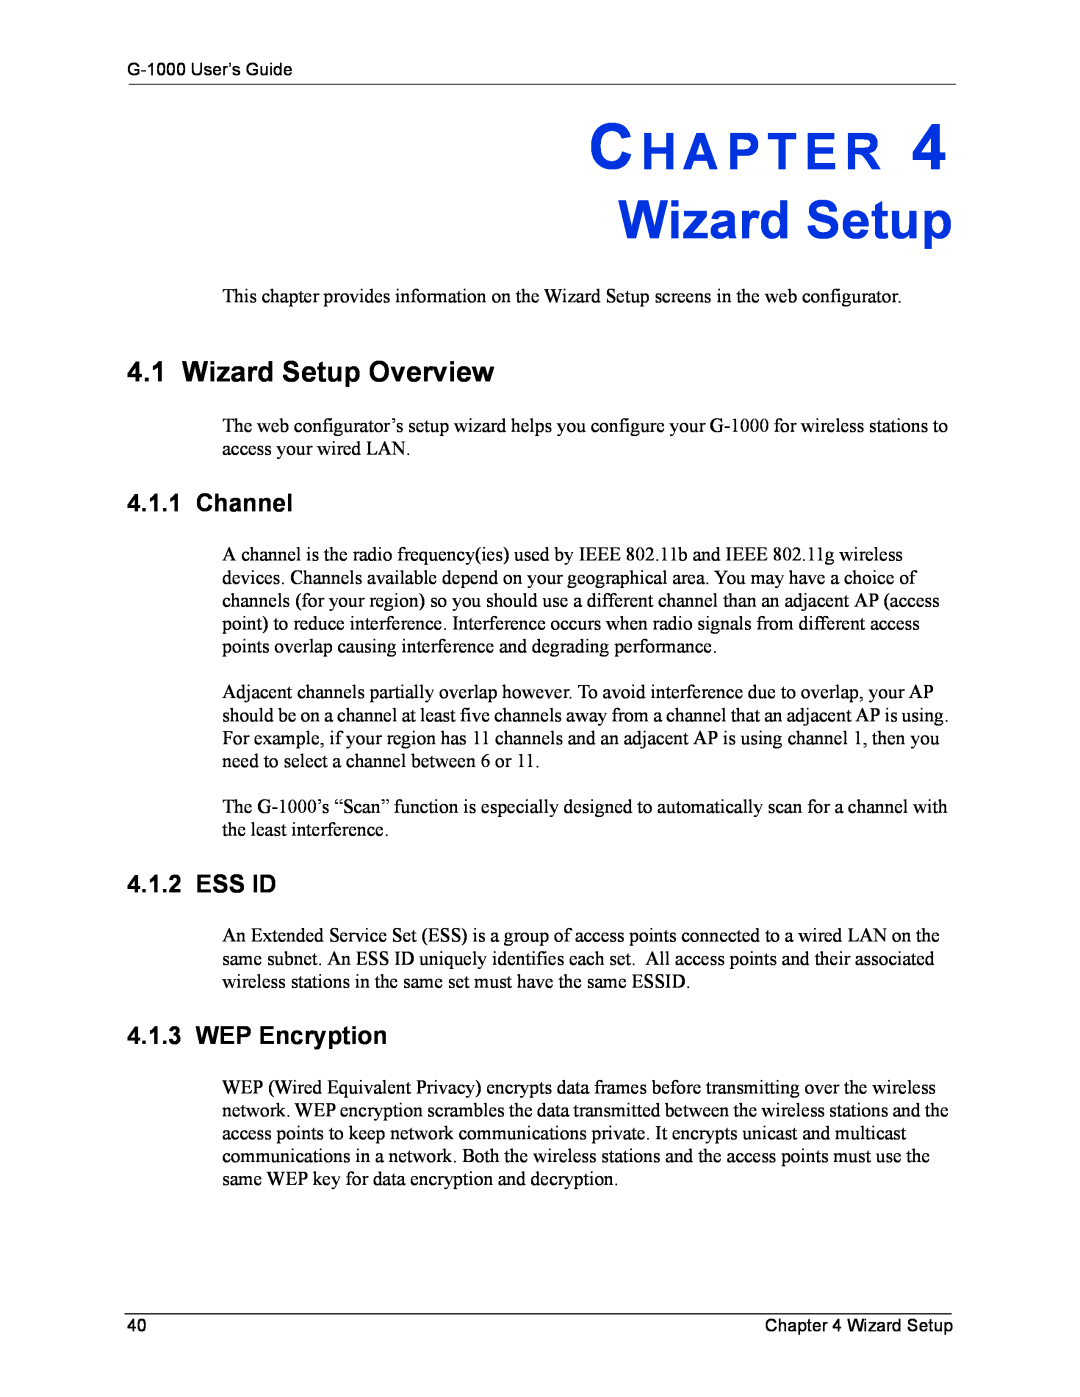 ZyXEL Communications G-1000 manual Wizard Setup Overview, Channel, Ess Id, WEP Encryption, Ch A P T E R 